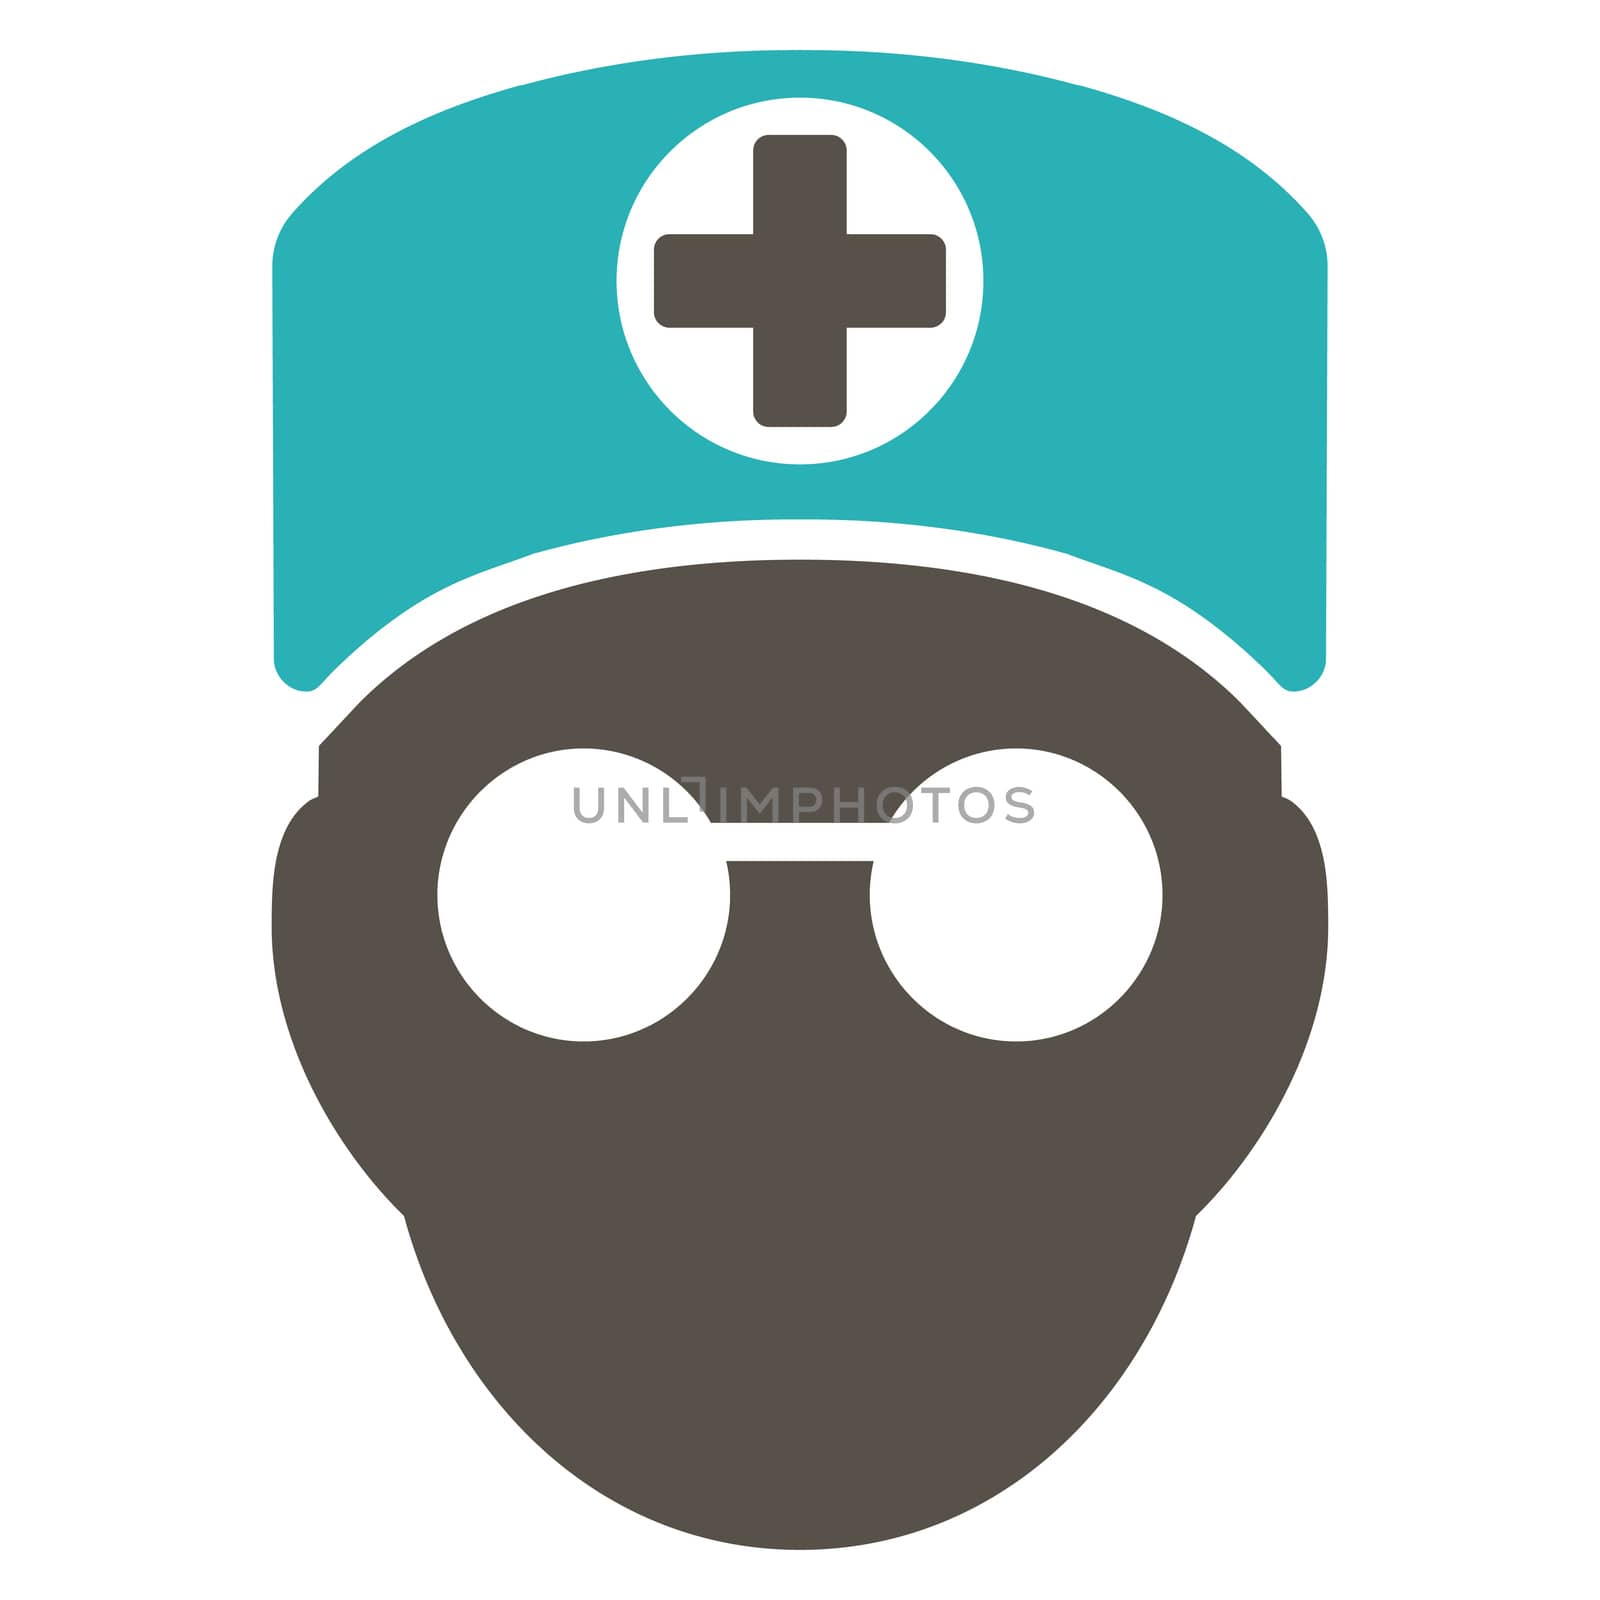 Doctor Head raster icon. Style is bicolor flat symbol, grey and cyan colors, rounded angles, white background.